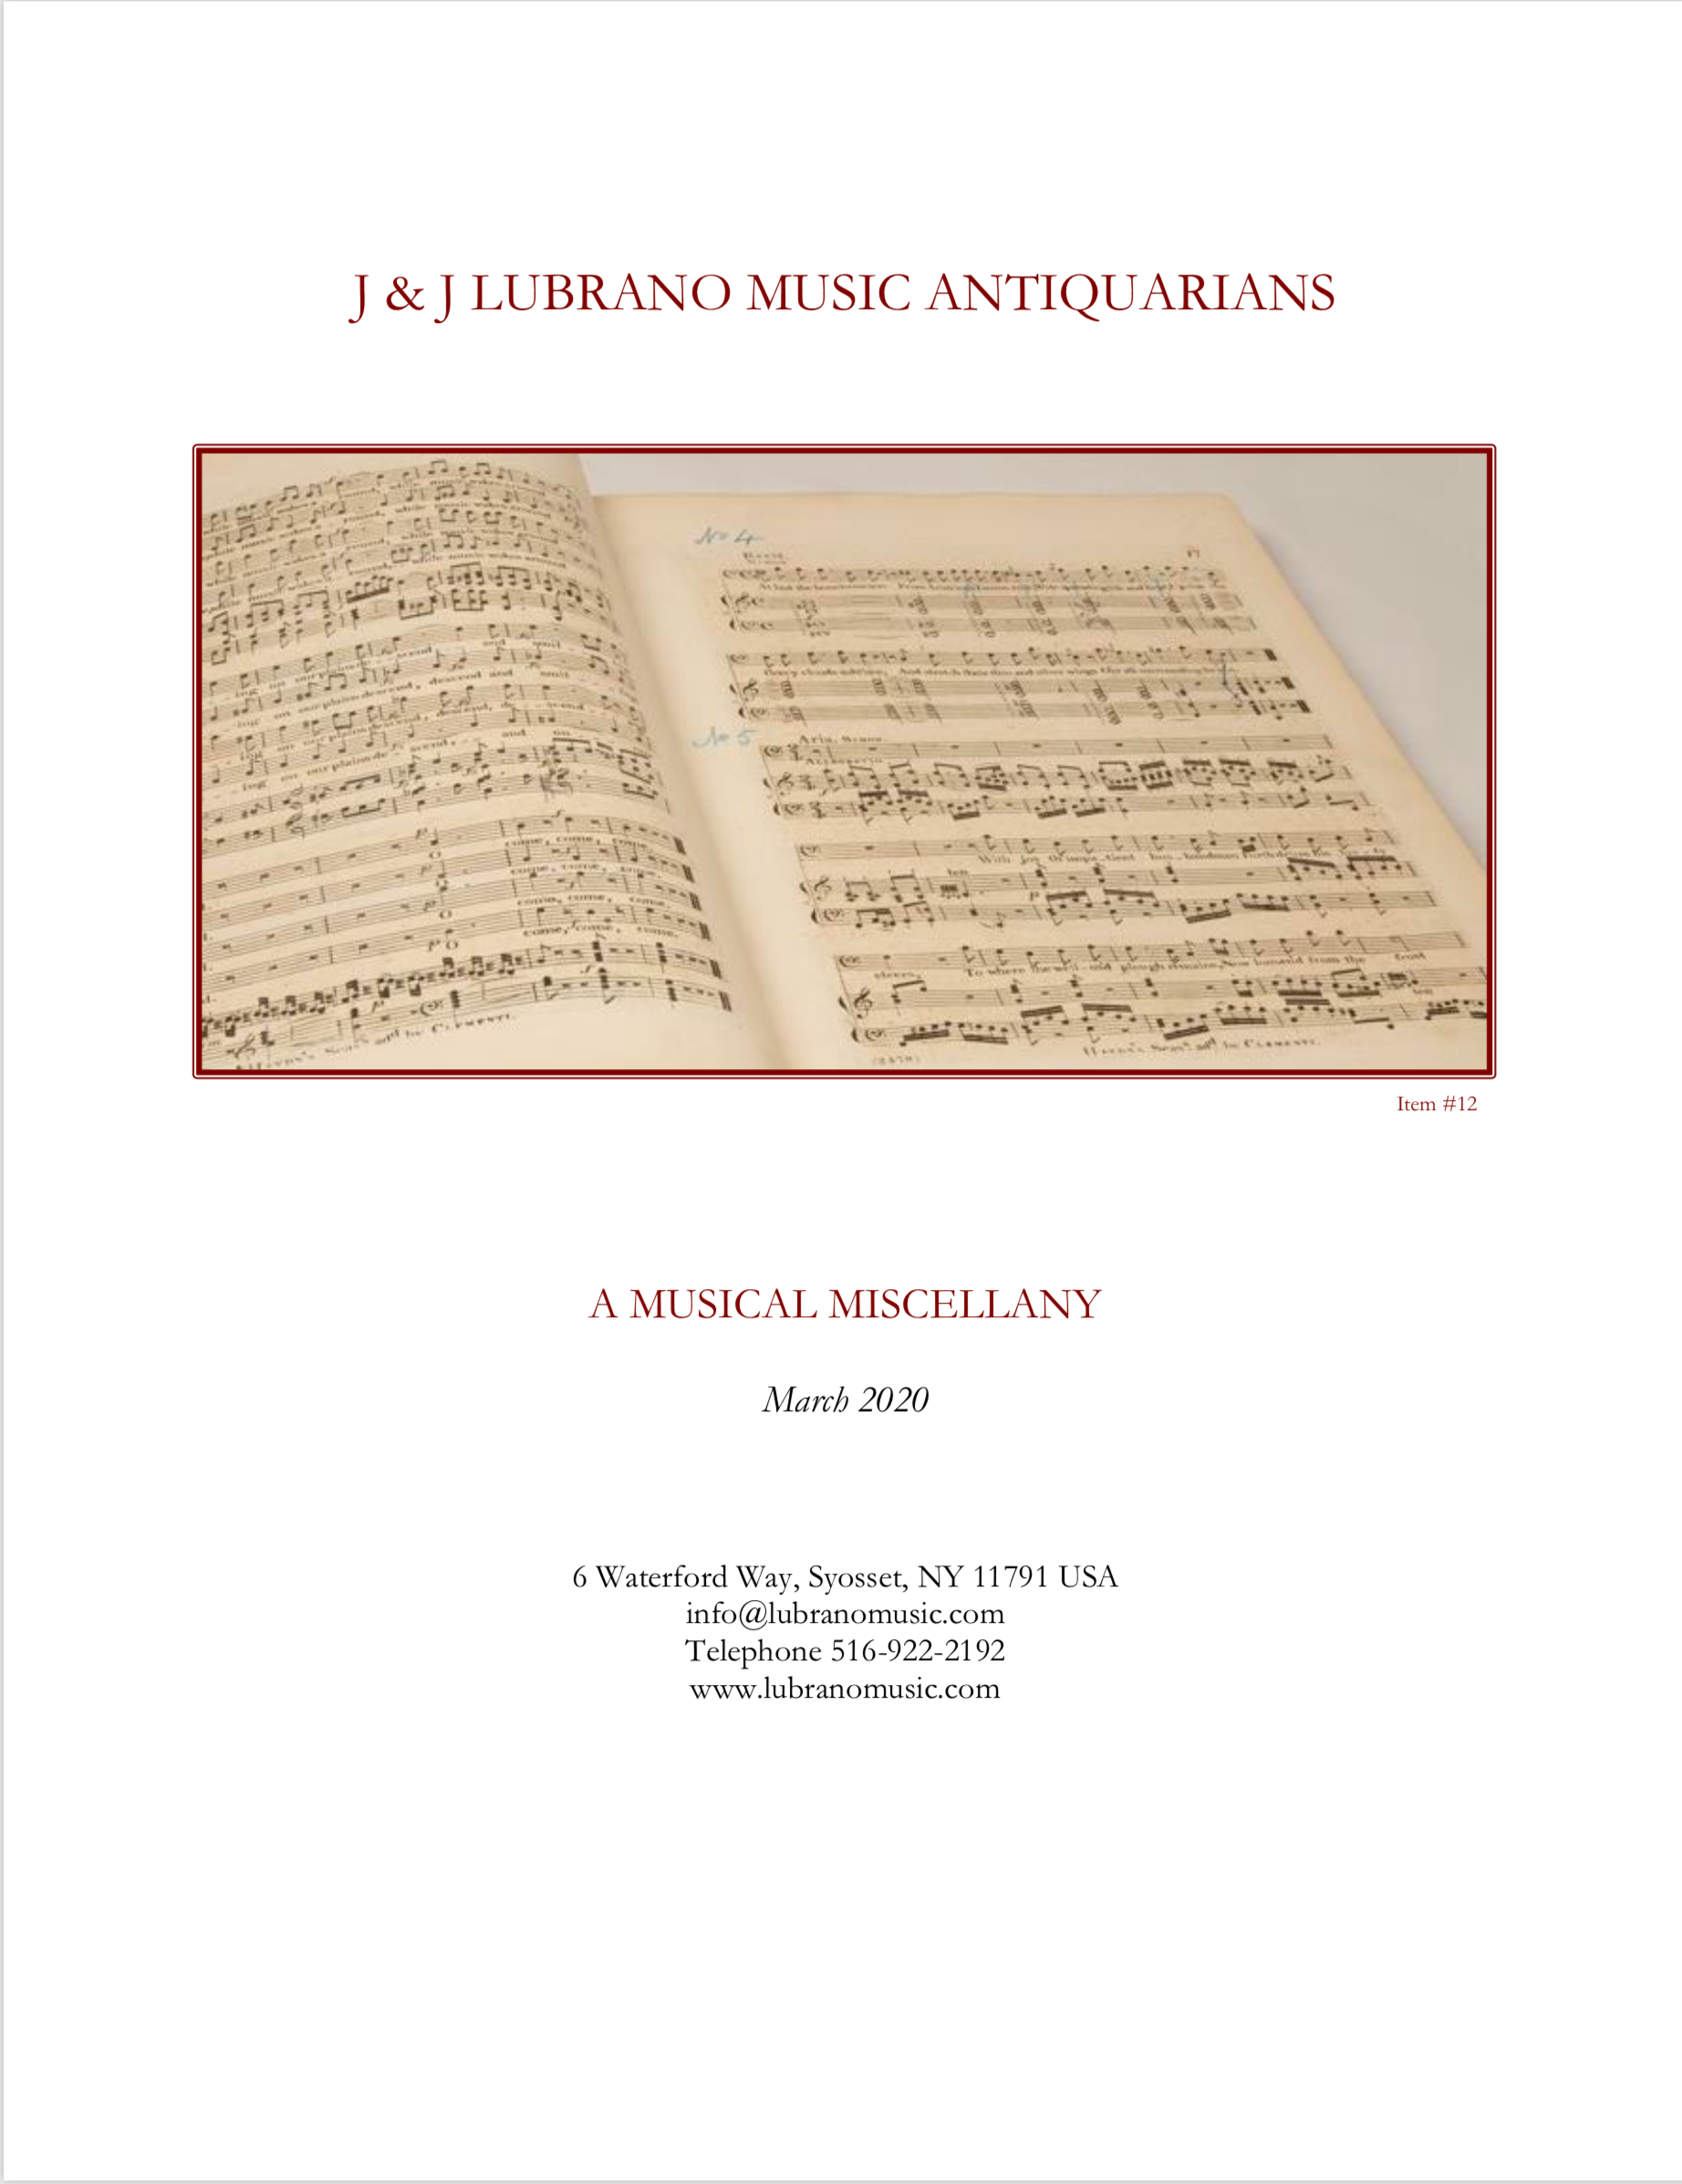 A Musical Miscellany